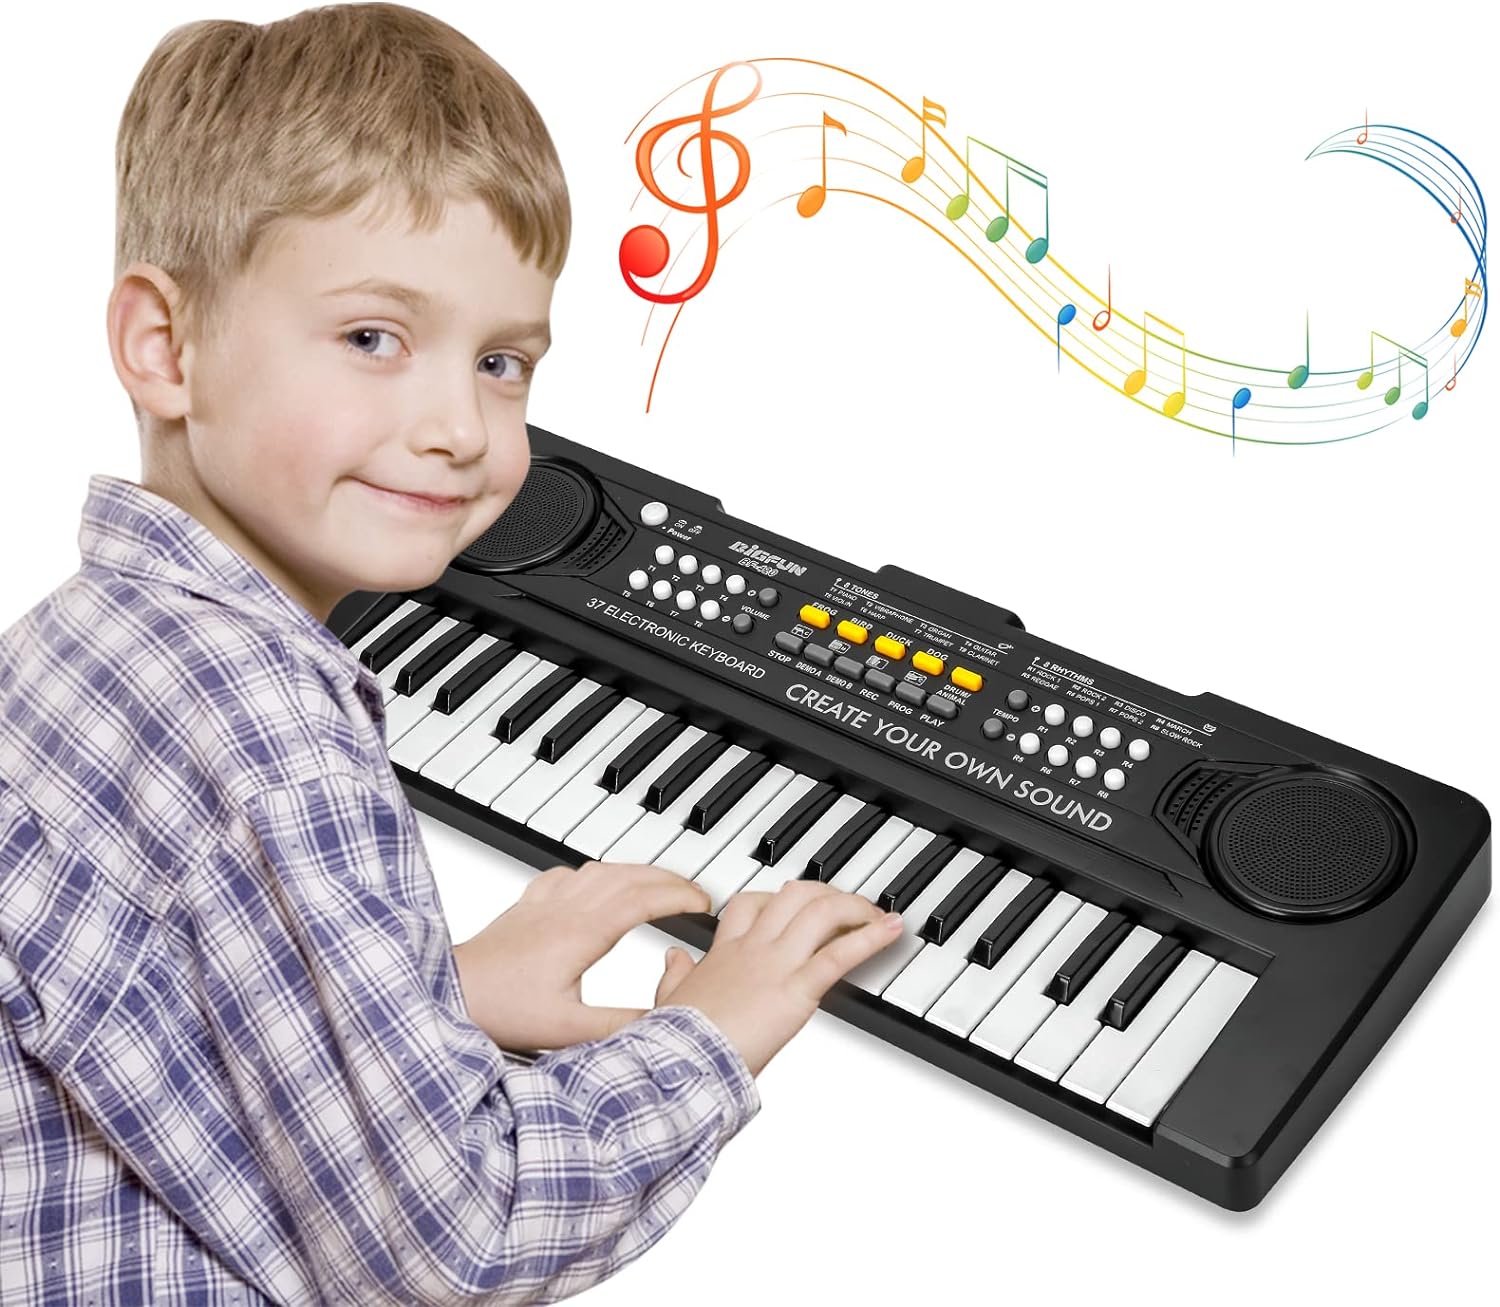 TOQIBO Kids Piano Keyboard, 37 Keys Electronic Piano for Kids Portable Multi-Function Musical Instruments Birthday Educational Gift Toys for 3 4 5 6 7 8 Year Old Boys Girls Children Beginner(Black) : Toys Games